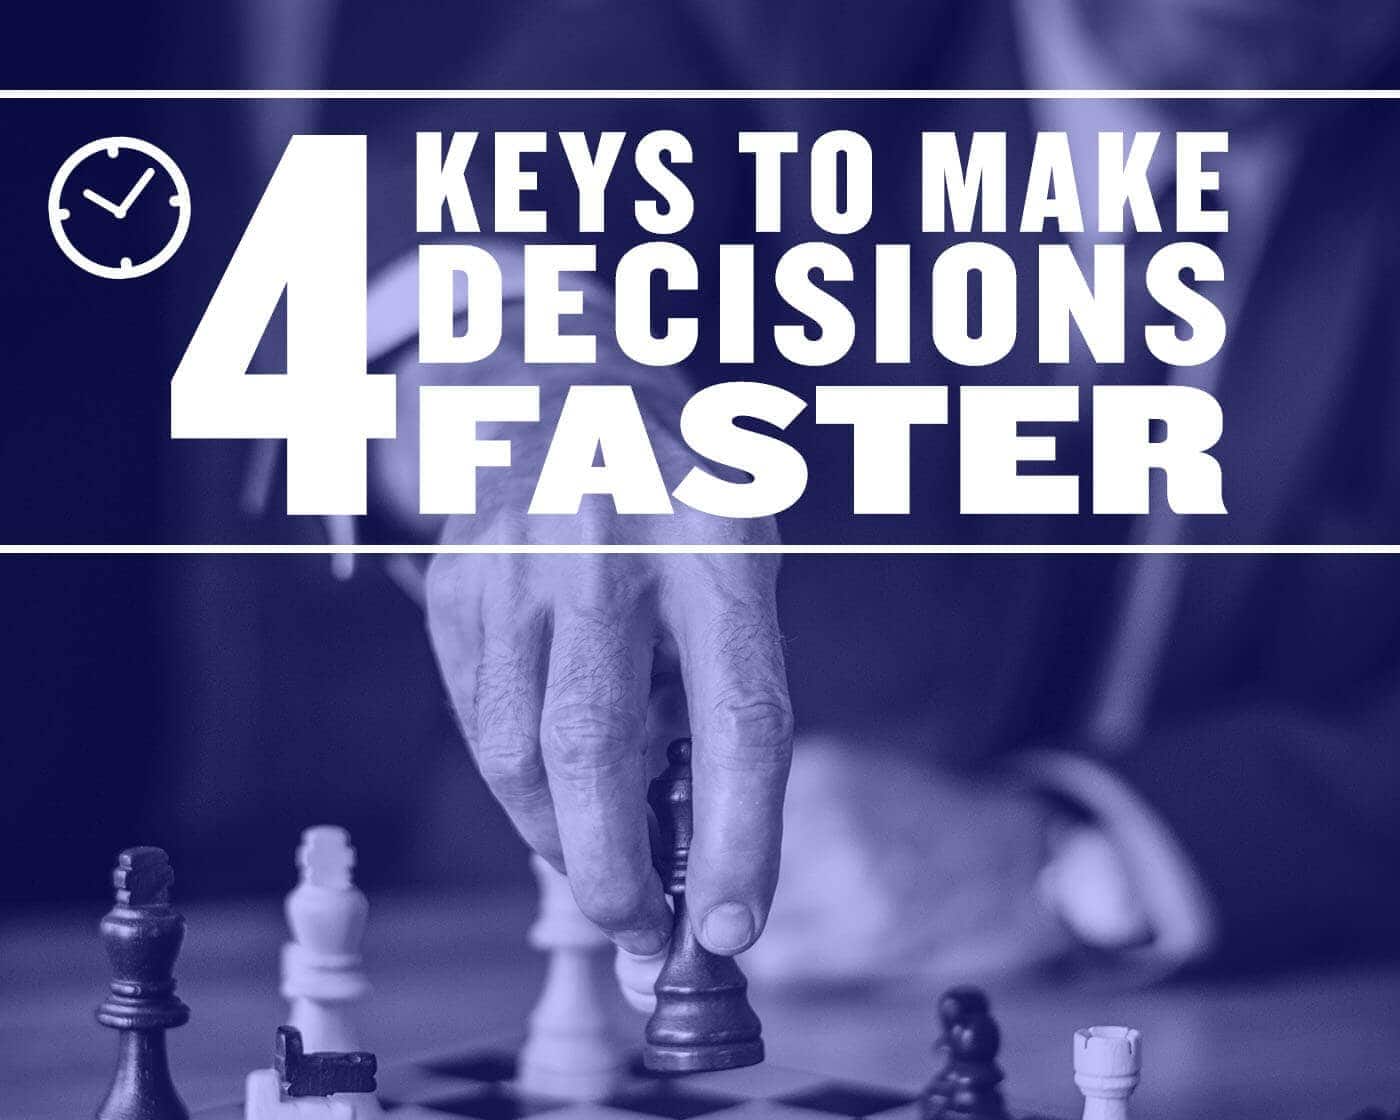 4 Keys to Make Decisions Faster